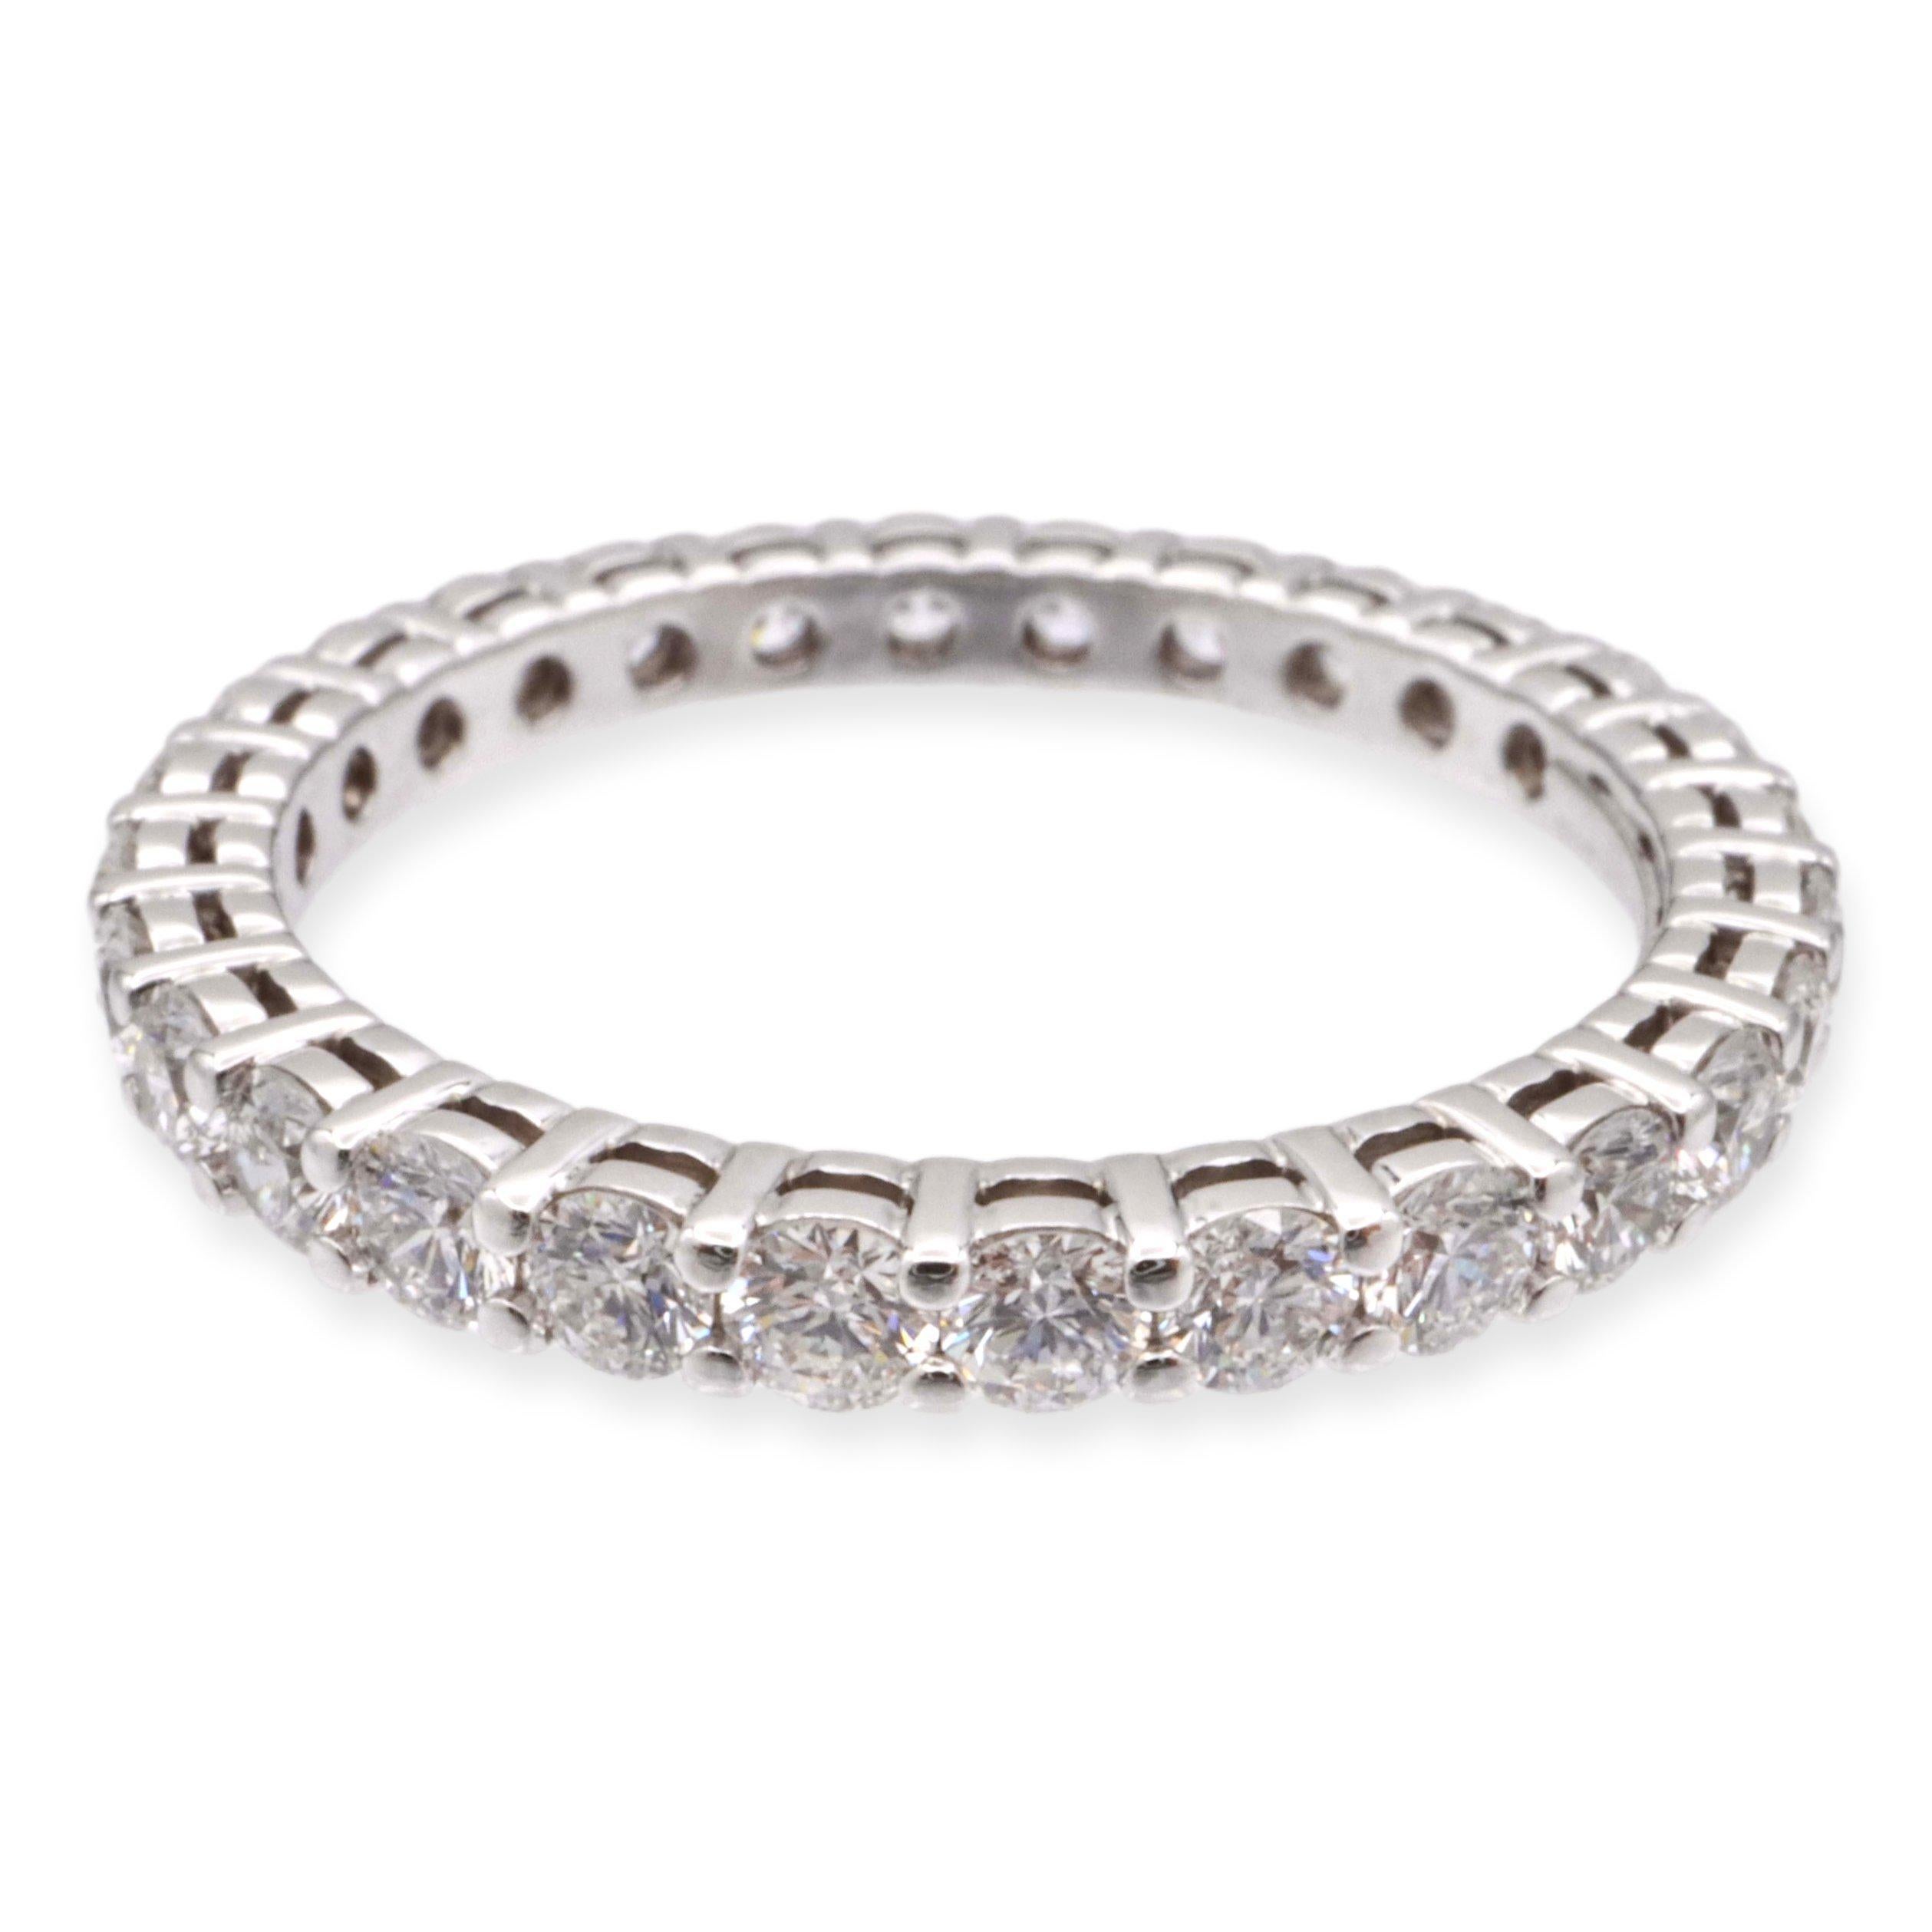 Tiffany & Co. Eternity band from the Forever collection finely crafted in Platinum with an open gallery and 28 round brilliant cut diamonds set in shared prongs weighing 0.85 carats total weight with an open gallery design. High quality diamonds